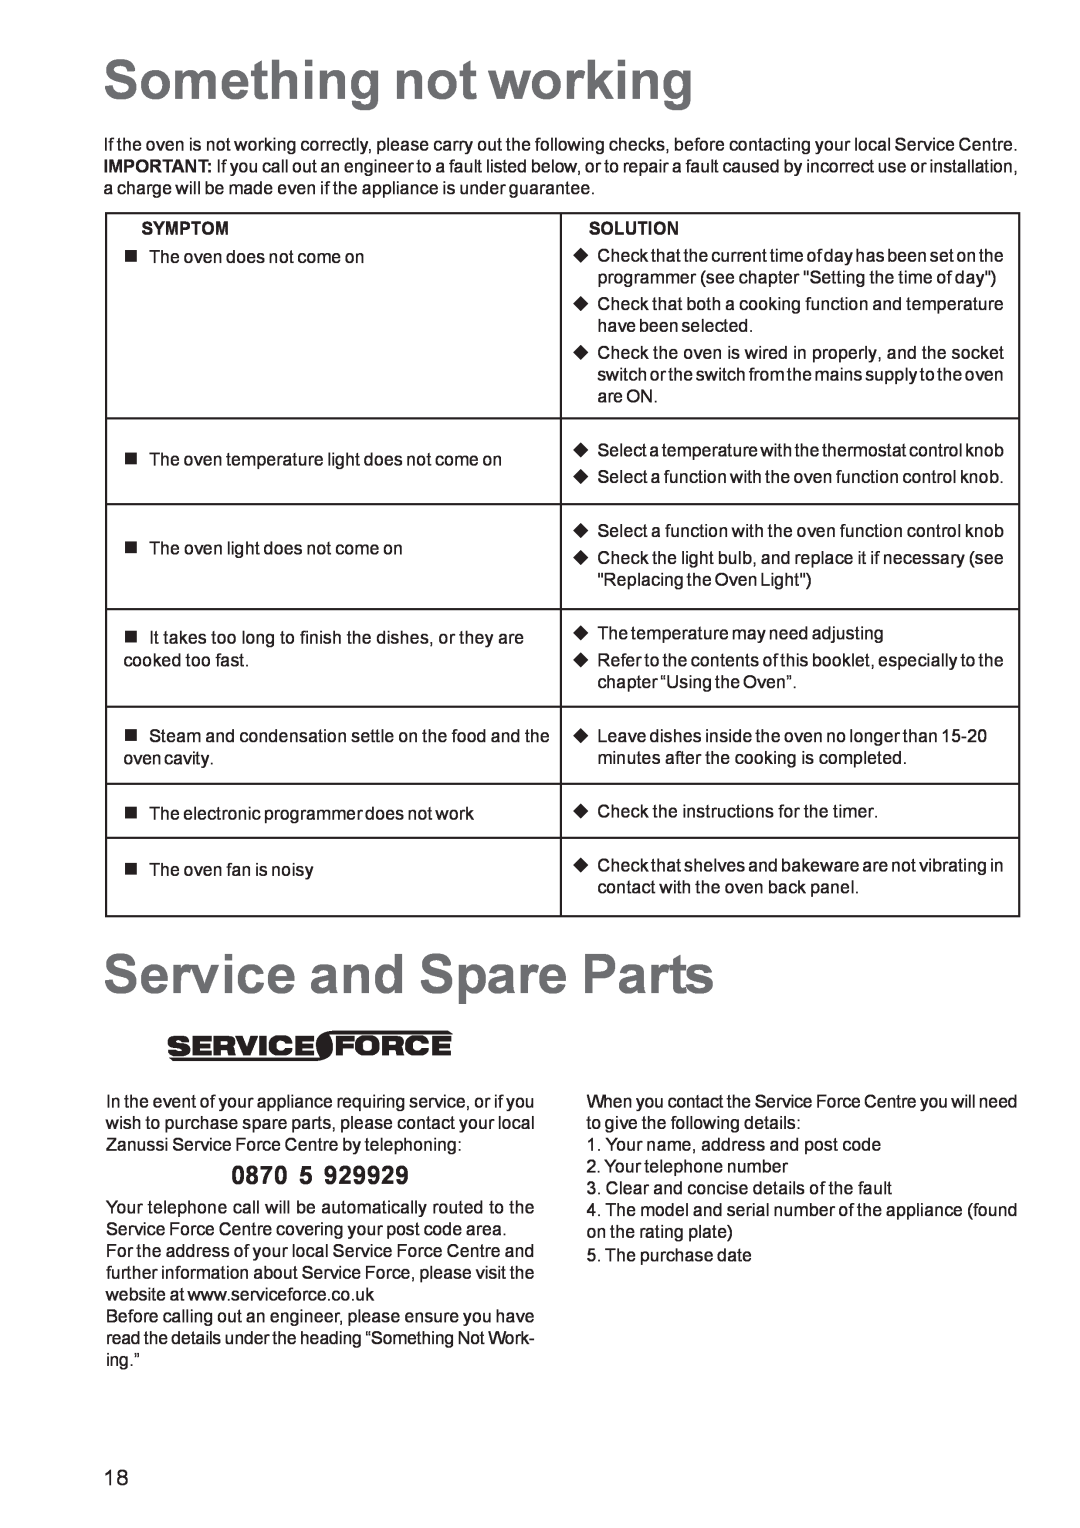 Zanussi ZBS863 manual Something not working, Service and Spare Parts, 0870, Symptom, Solution 